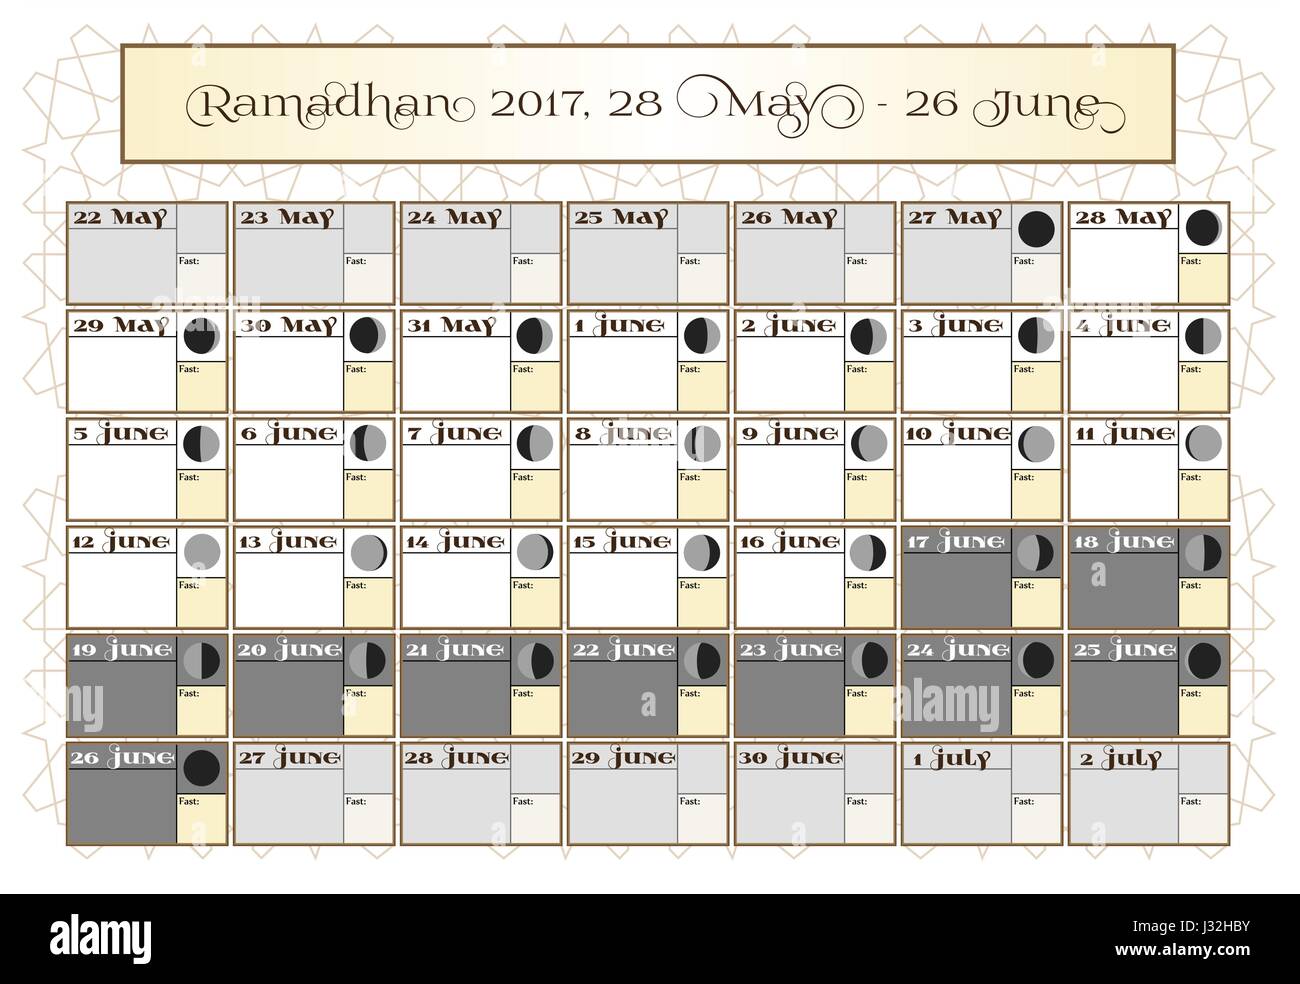 Ramadan calendar 2017, 28th May. Check date choice. Includes: fasting tick calendar, moon cycle - phases, 30 days of Ramadan on white background with Islamic pattern. Vector illustration. Stock Vector